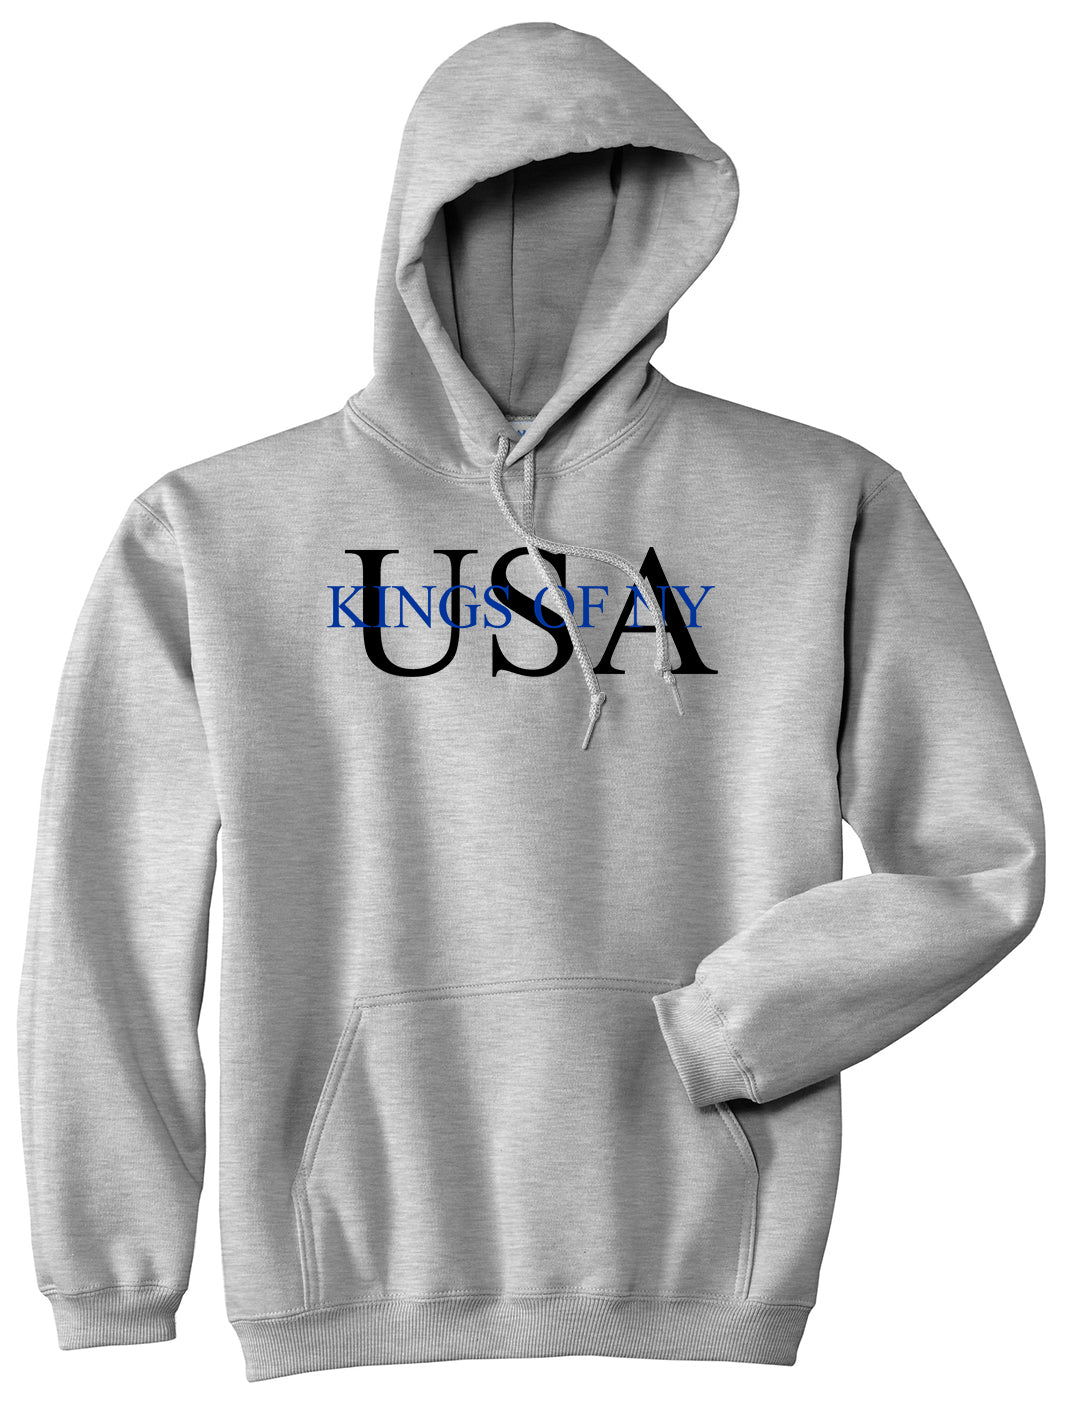 USA Kony Logo Pullover Hoodie in Grey